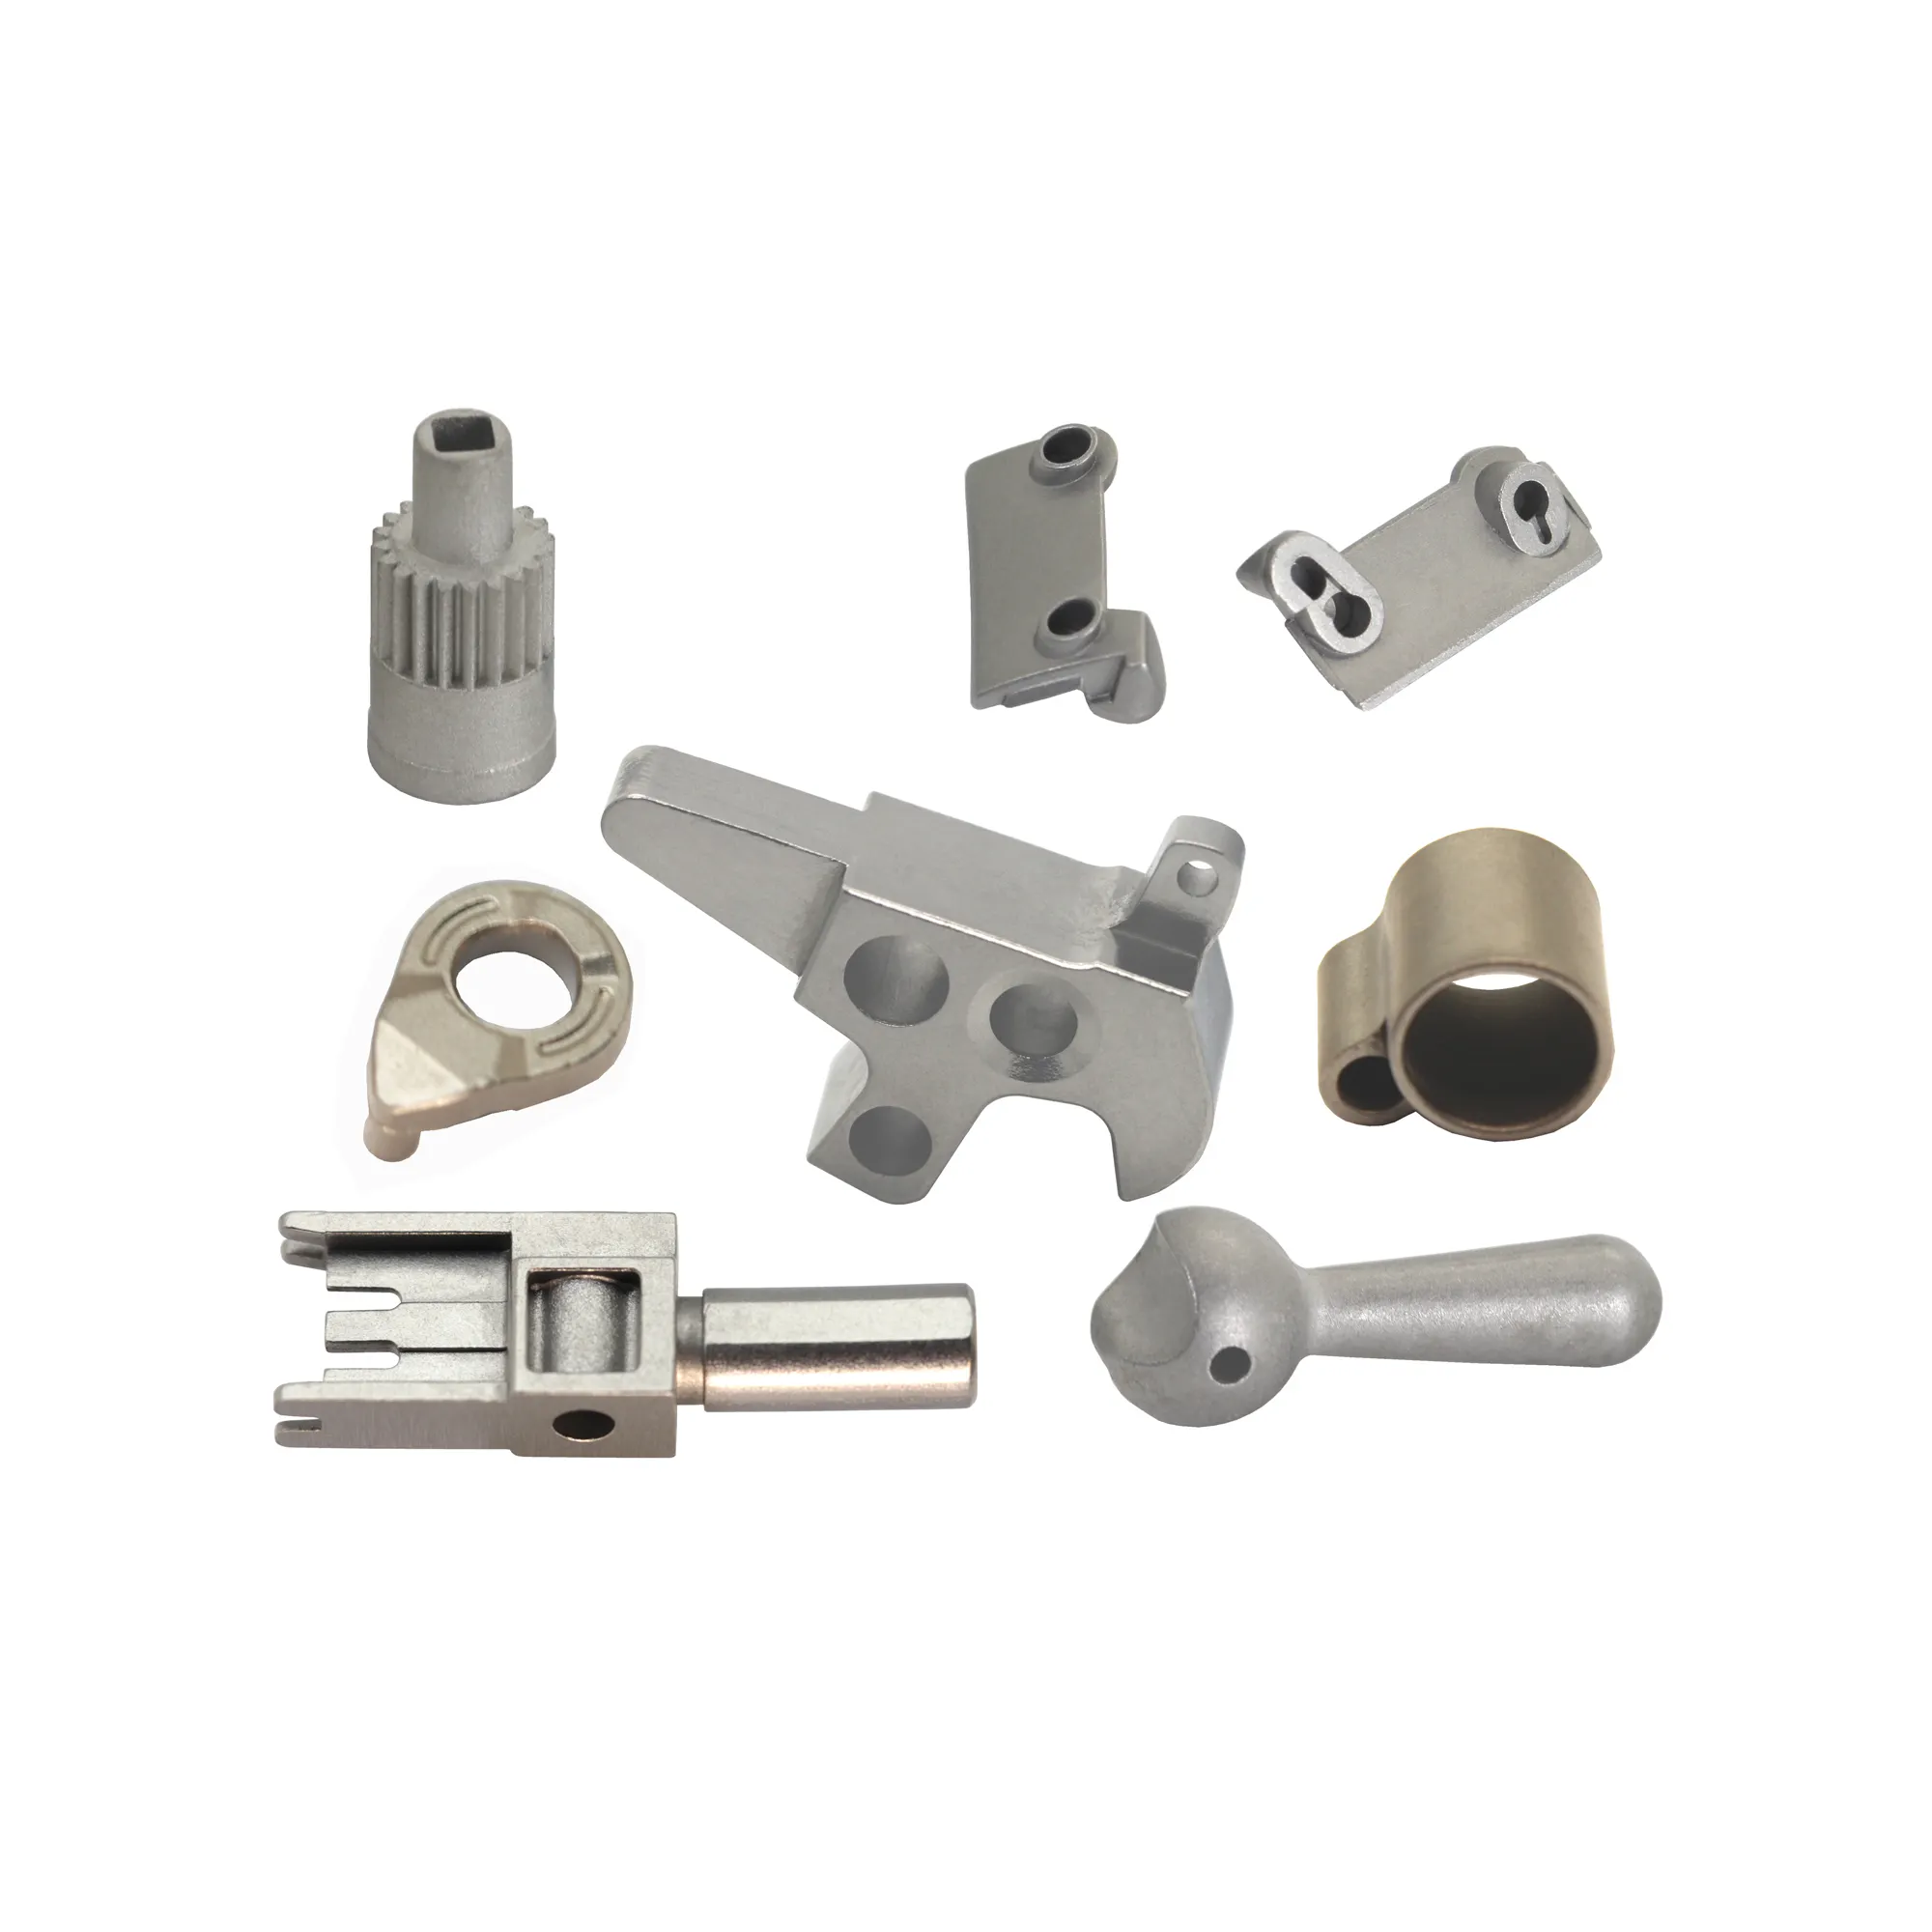 precision mim small precision metal parts supplied from MMT Shanghai